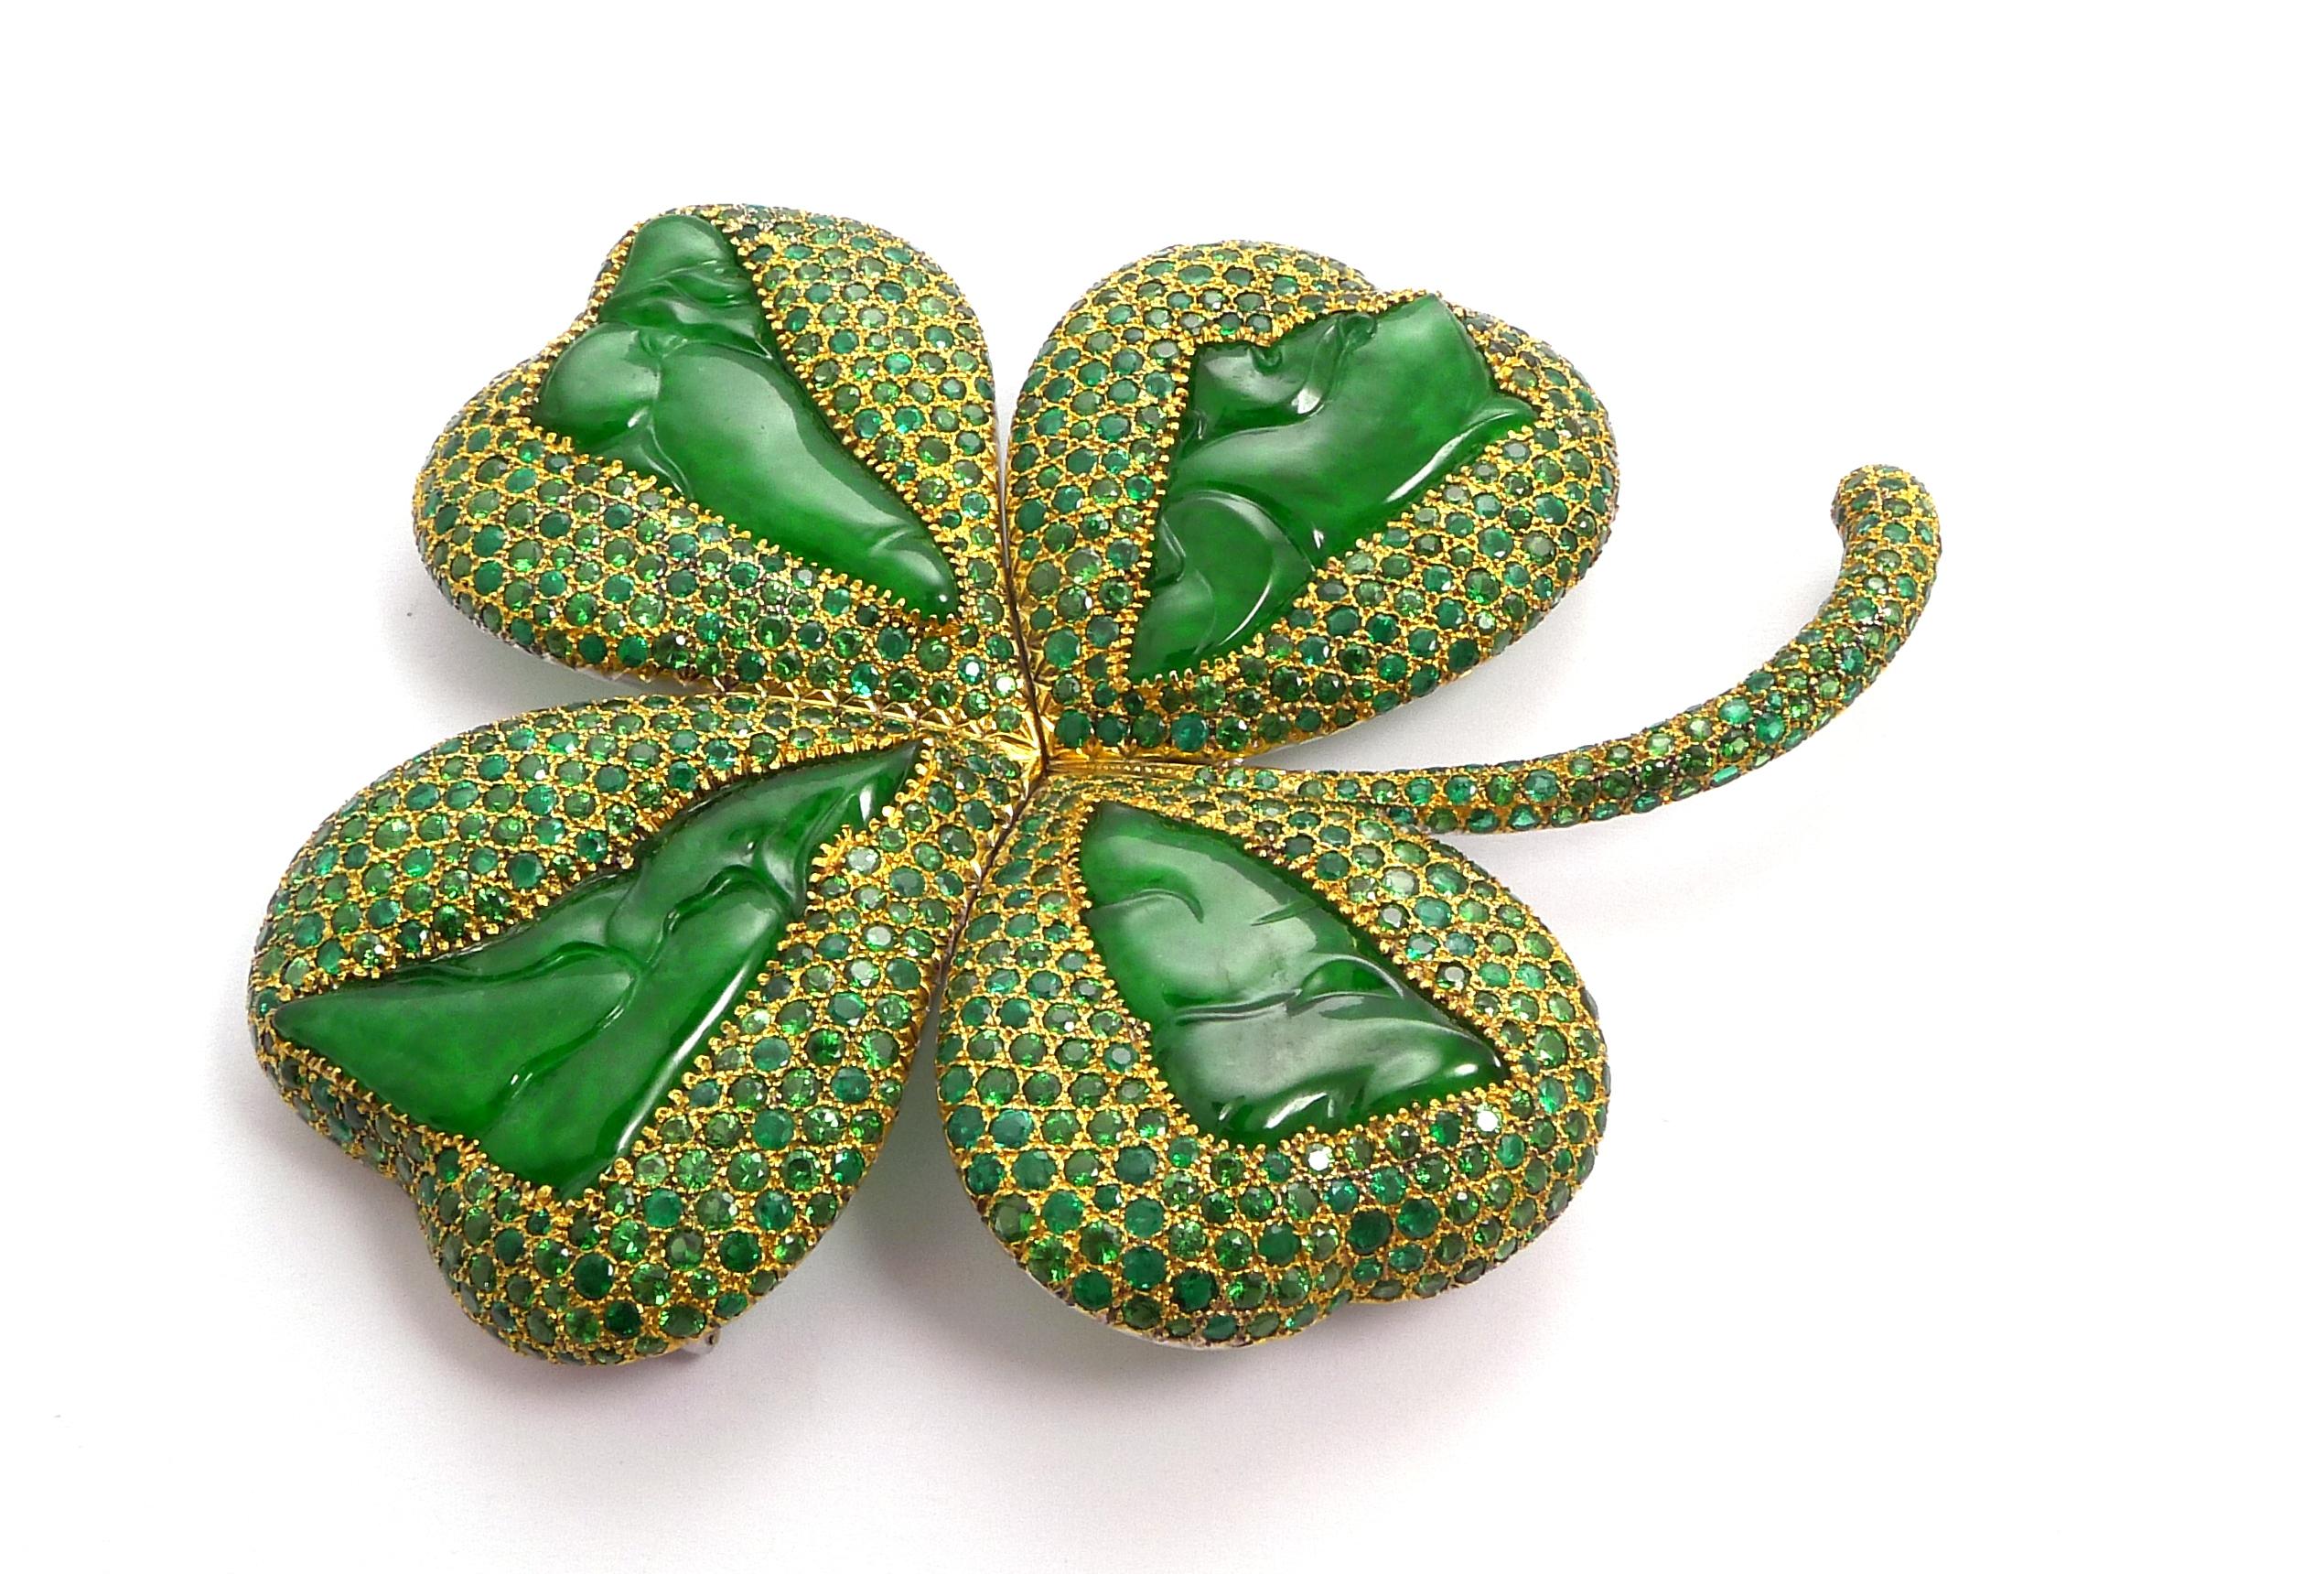 Modelled as a gold four-leaf clover pavé-set with round emeralds and tsavorite garnets, enhanced with four carved jade plaques

Mounted in 18K yellow gold

- 4 carved jade plaques: 28.30 ct total
- 375 round emeralds: 14.77 ct total
- 576 round